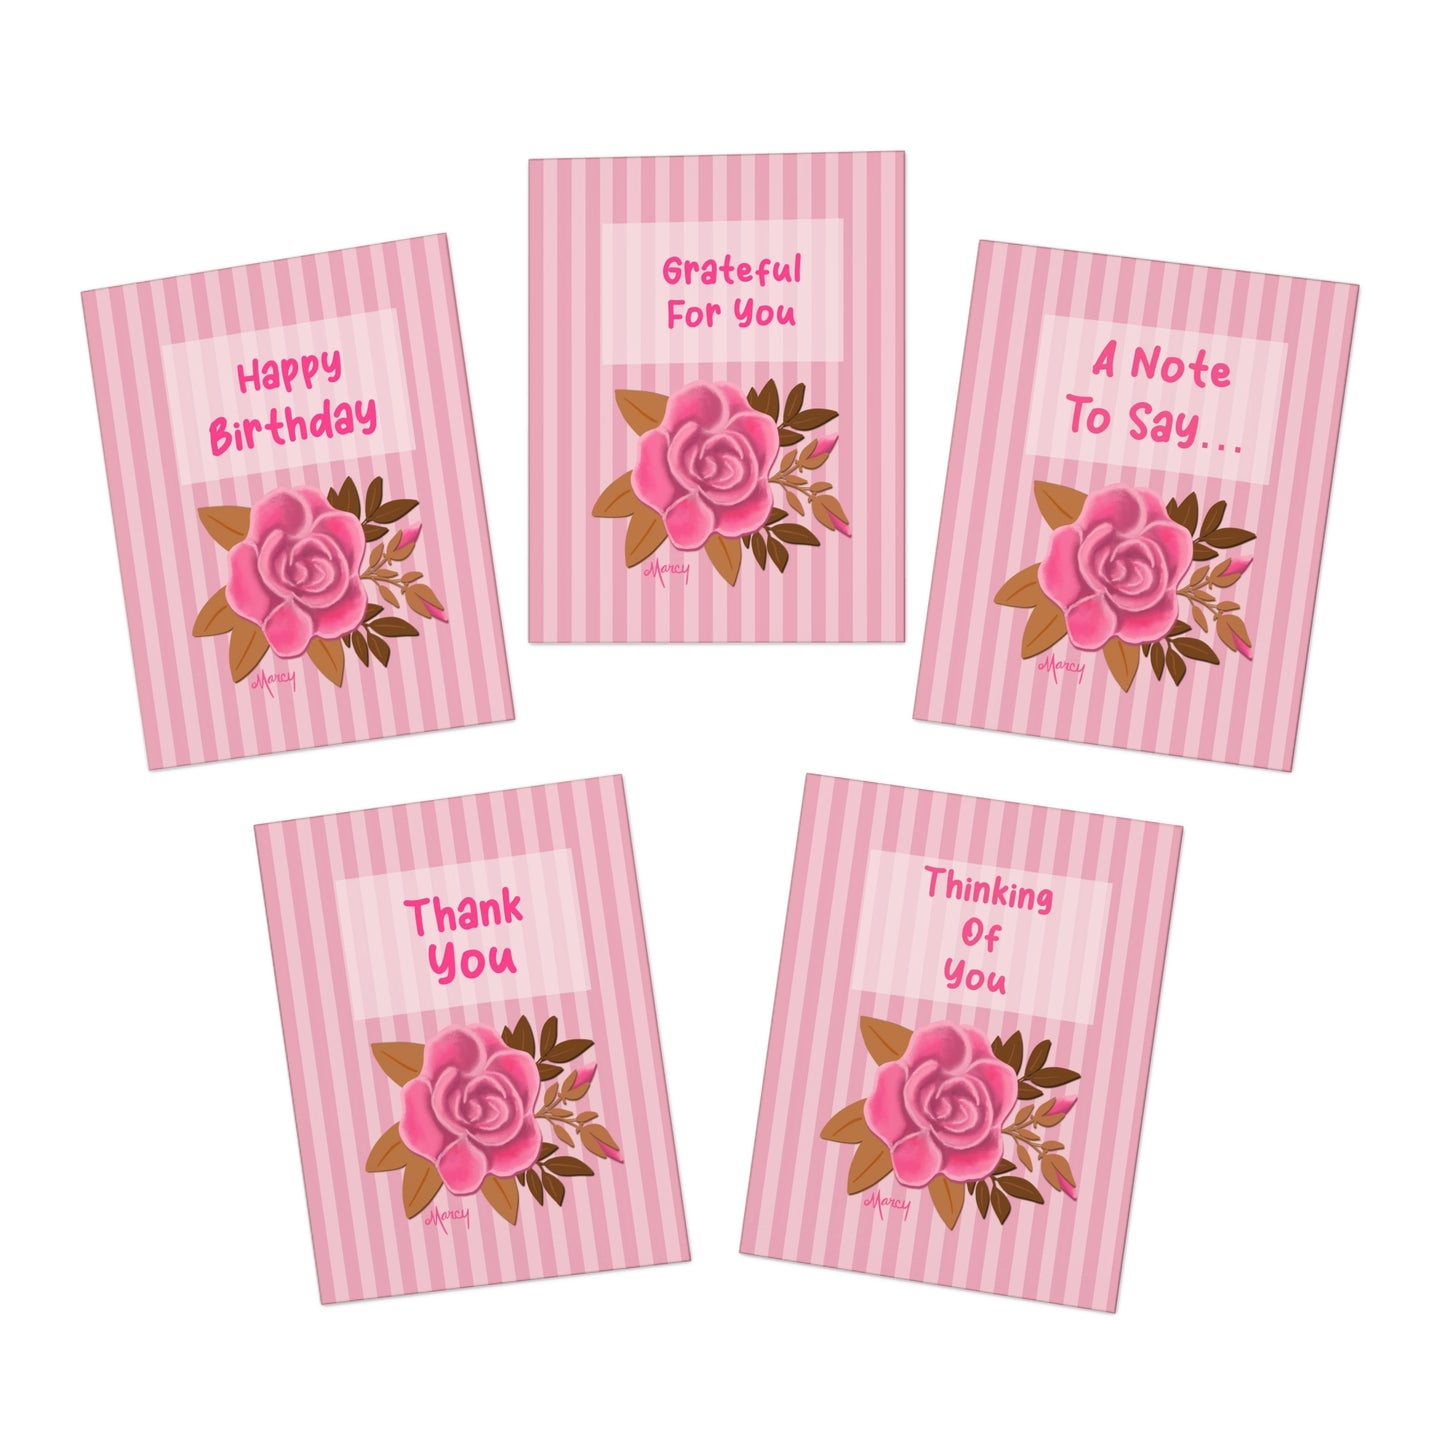 Pink Rose on Pink Stripes Multi-Occasion Multi-Design Greeting Cards (5-Pack) FREE SHIPPING